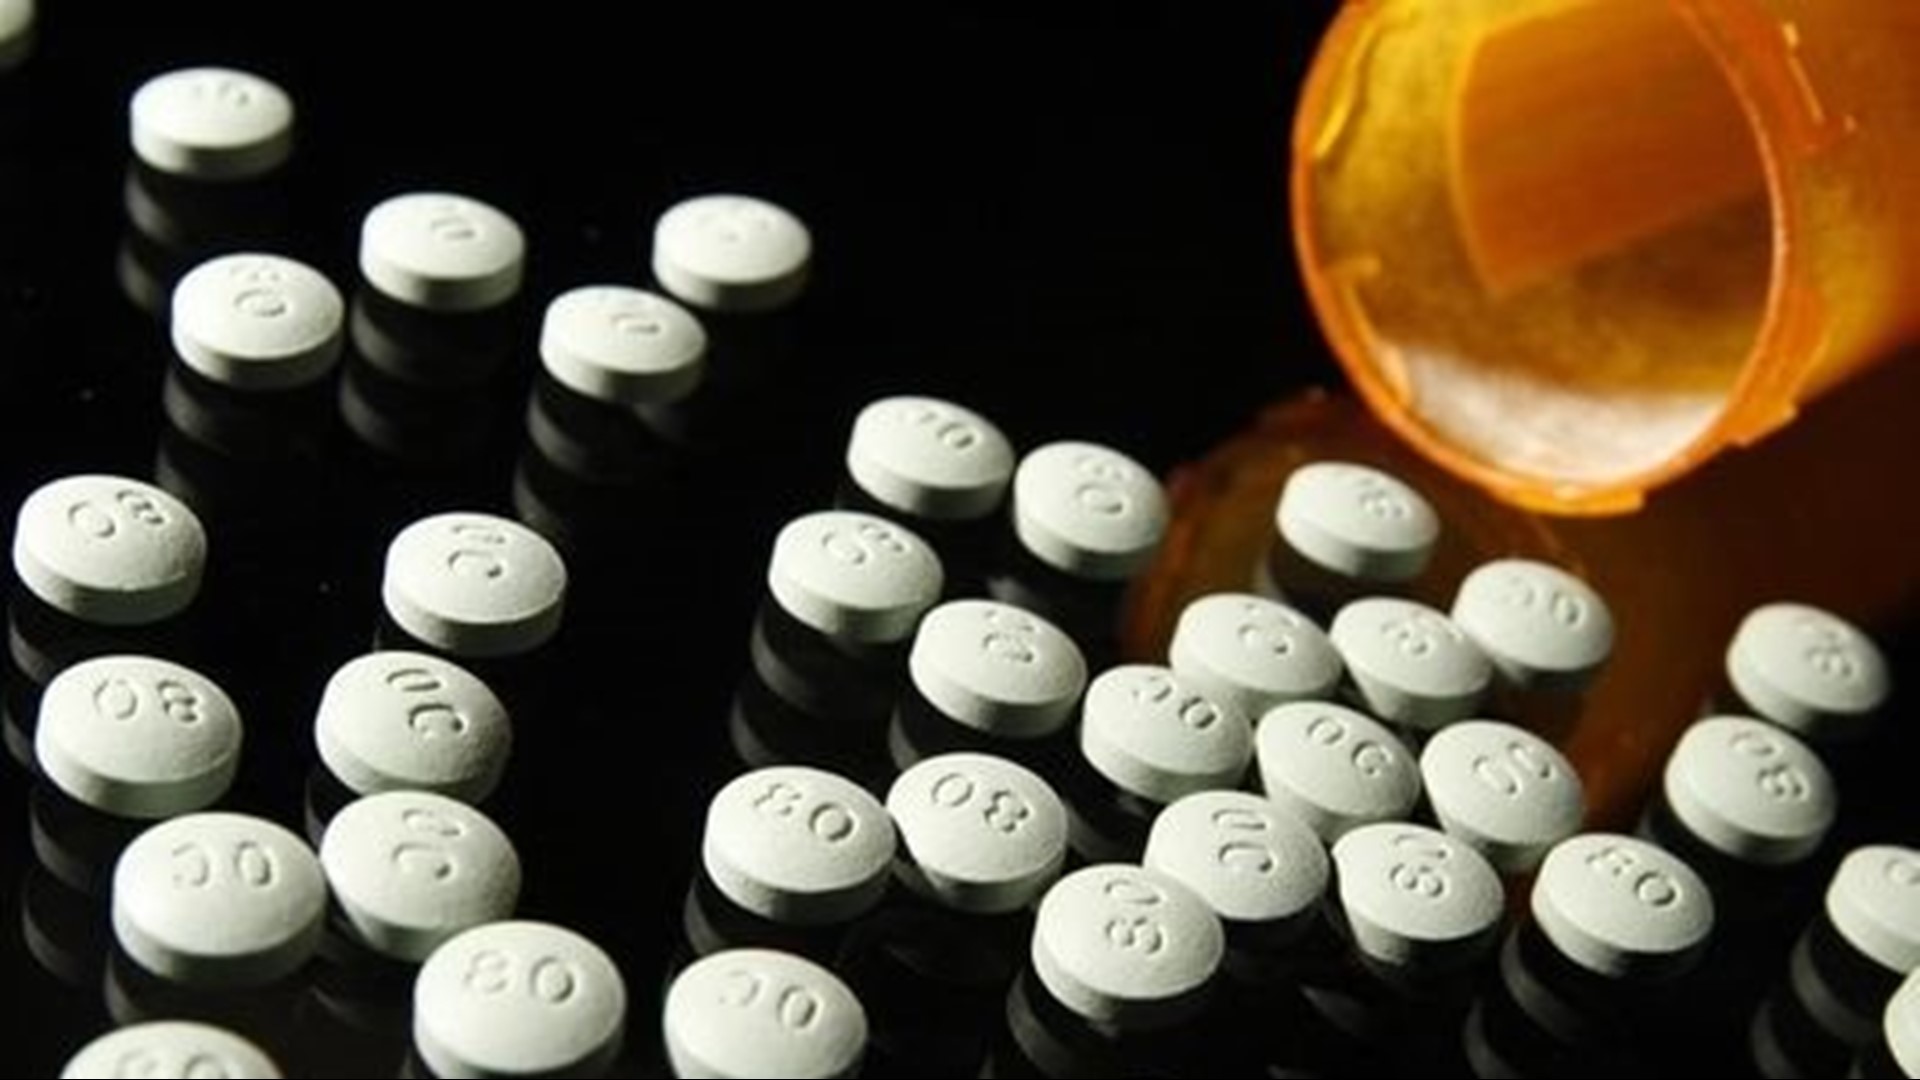 The next Drug Take Back Day takes place on Saturday, Oct. 26, when more than 5,000 organizations are expected to participate.